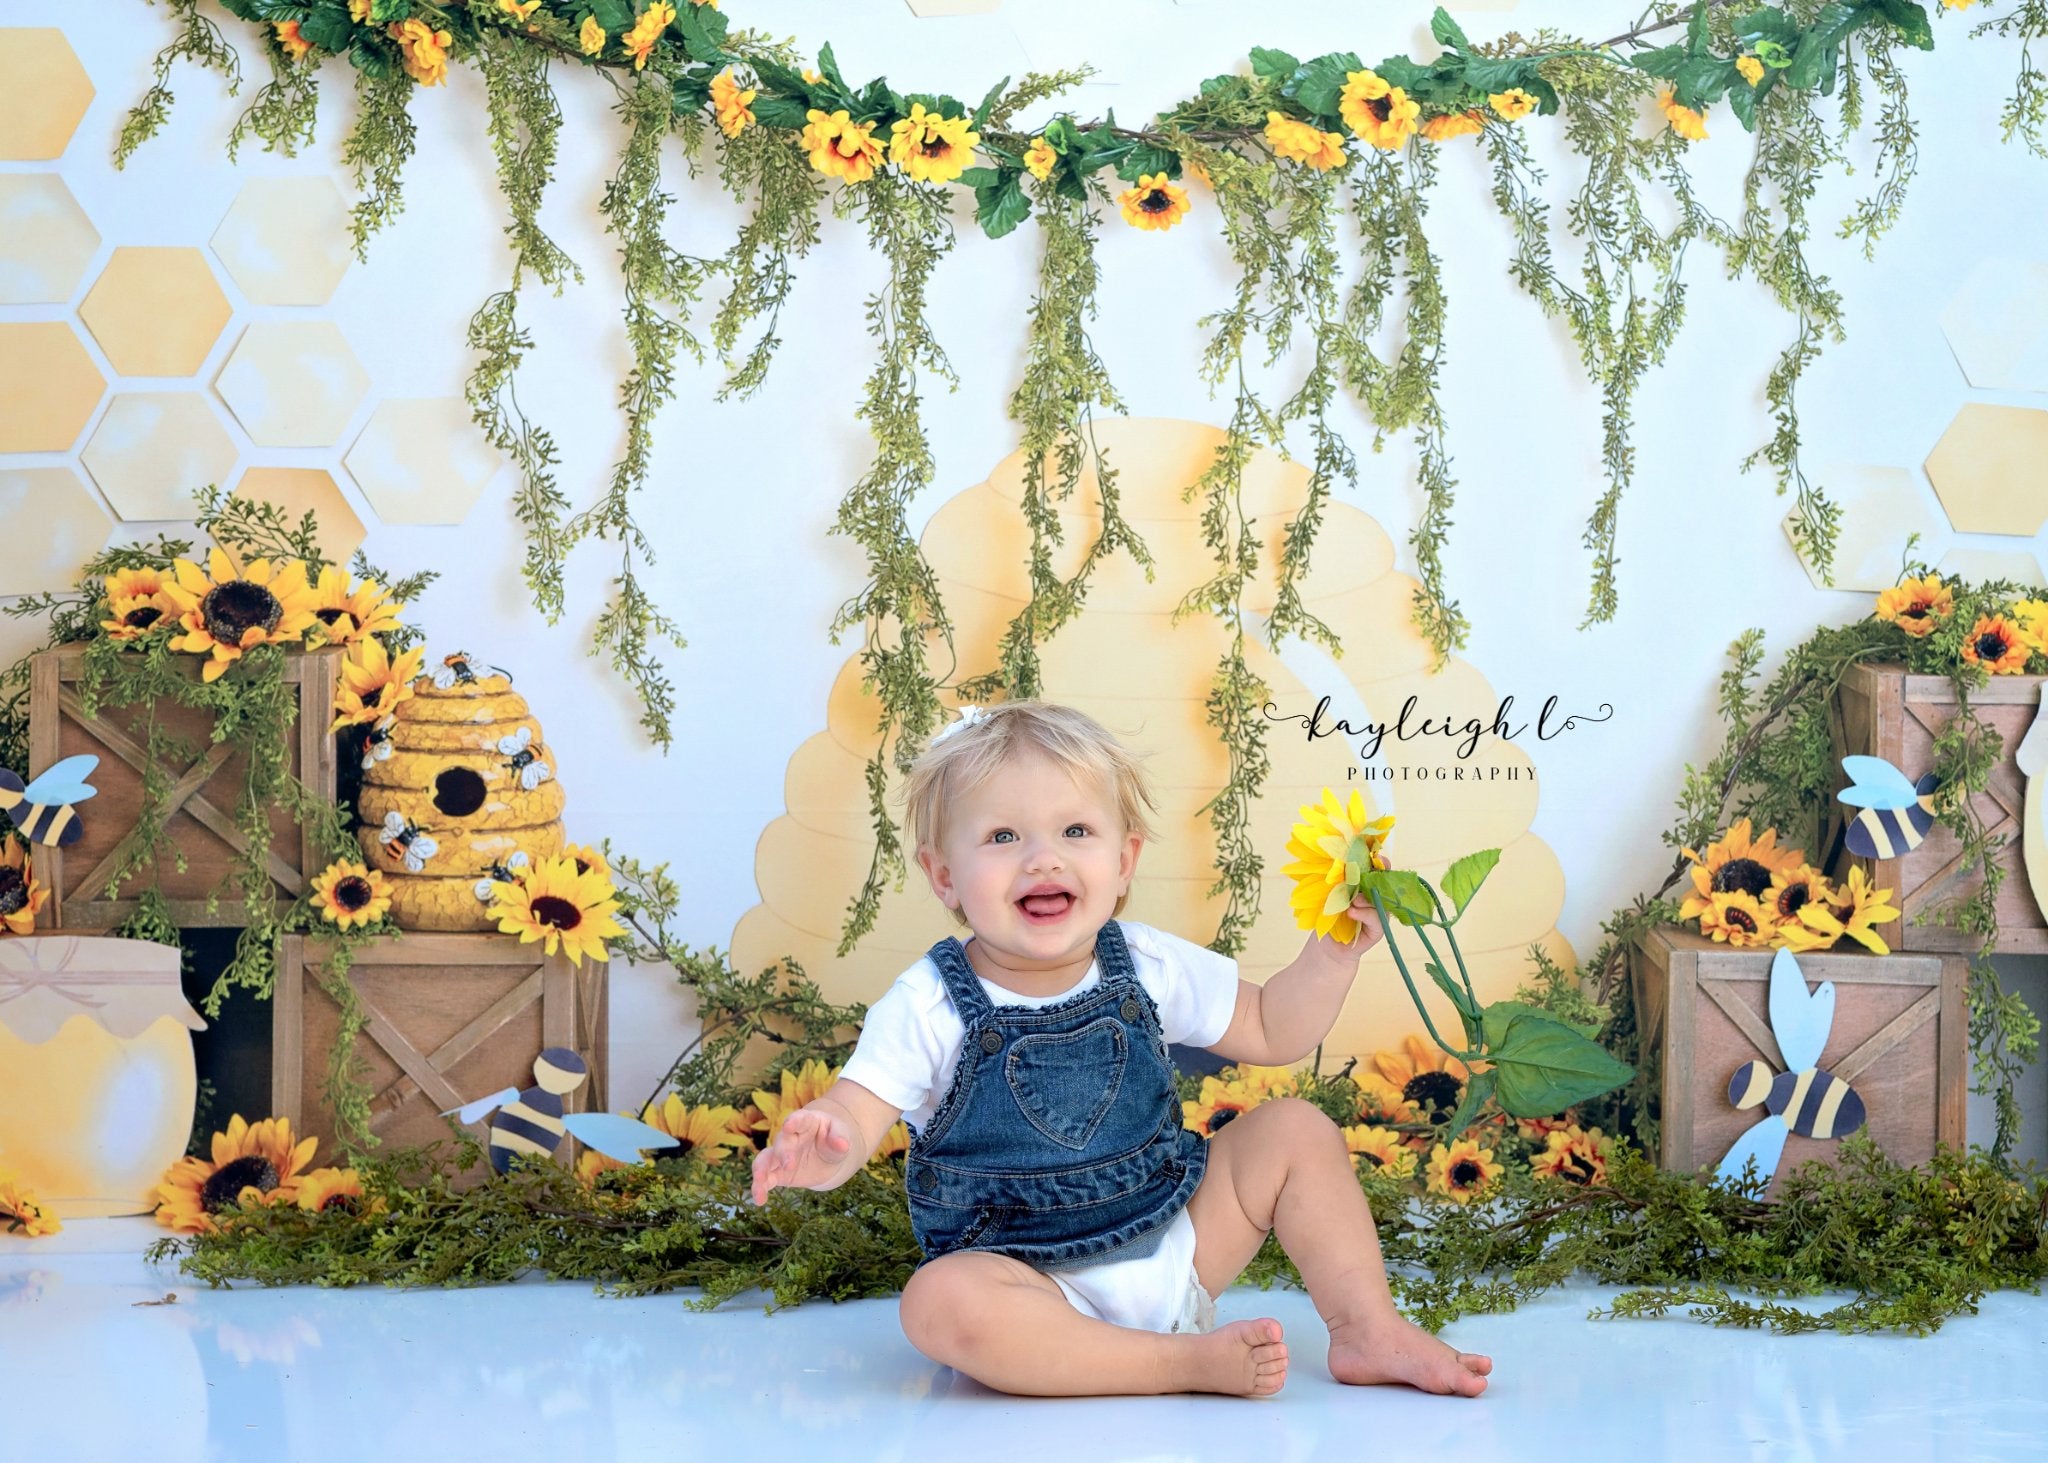 Kate Honey Bee Backdrop Sunflower Cake Smash Photography Designed by Megan Leigh Photography